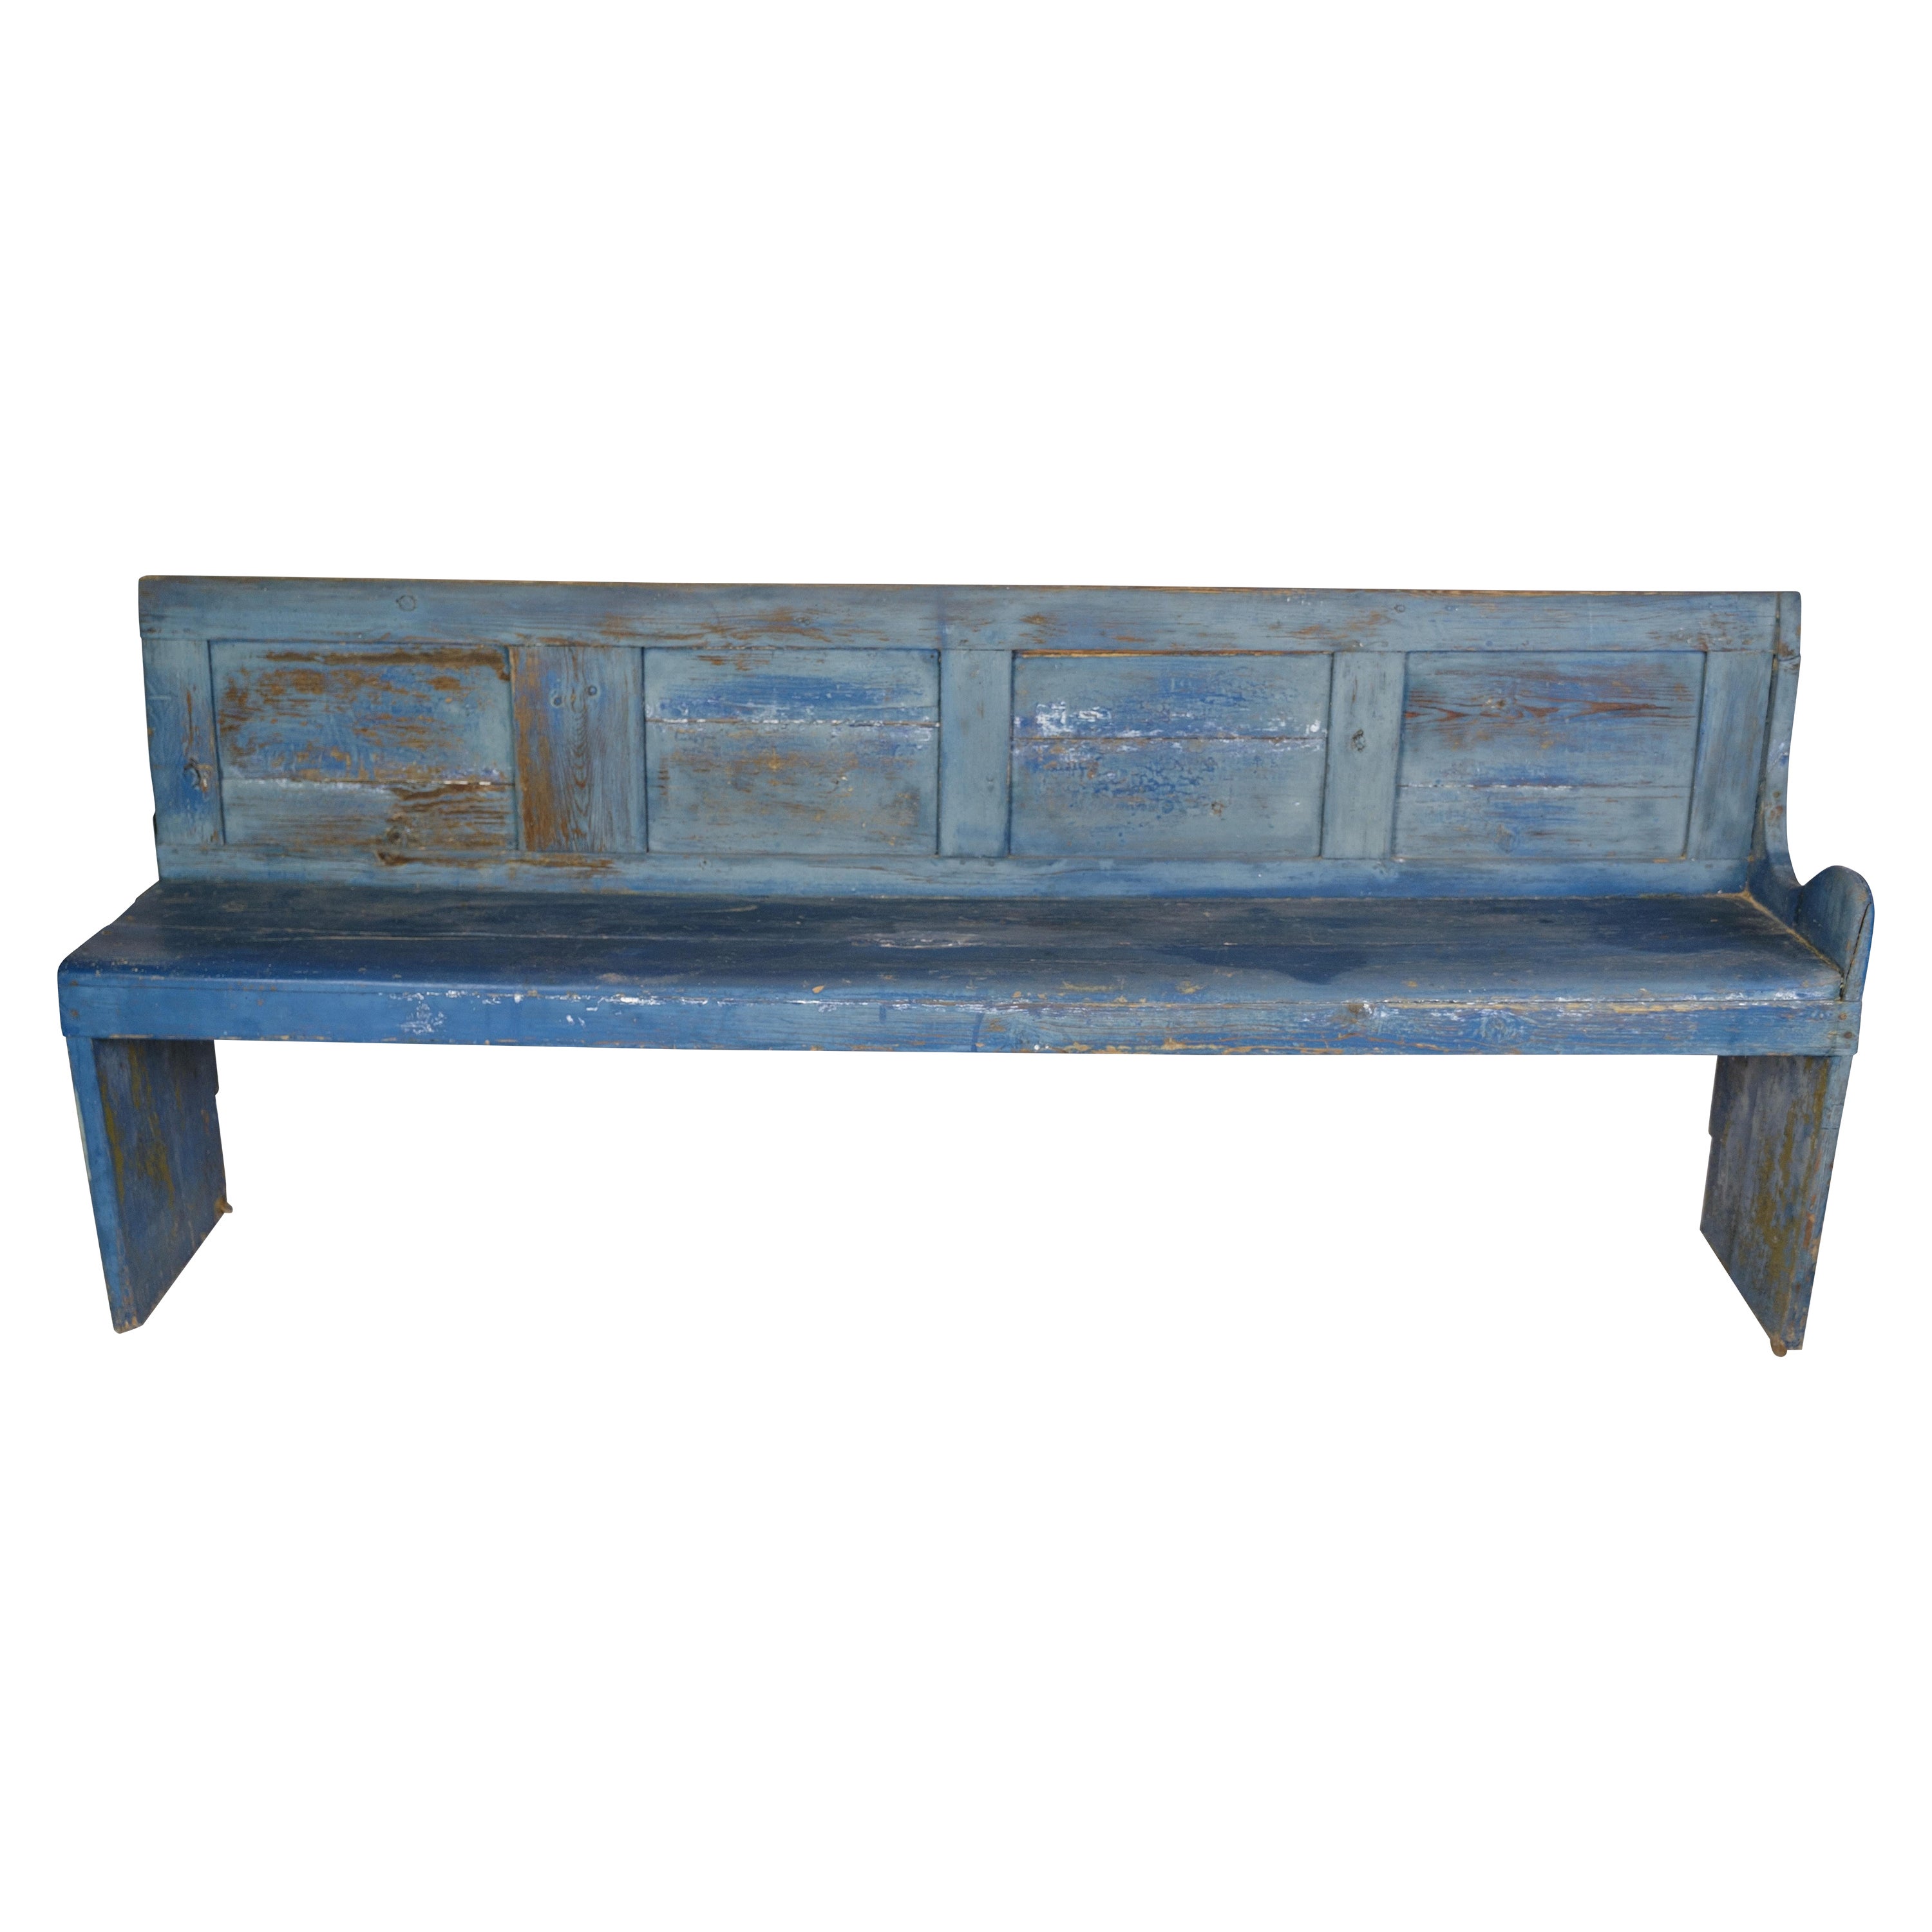 Original Blue Painted Pine Wood Bench from the 1840s For Sale